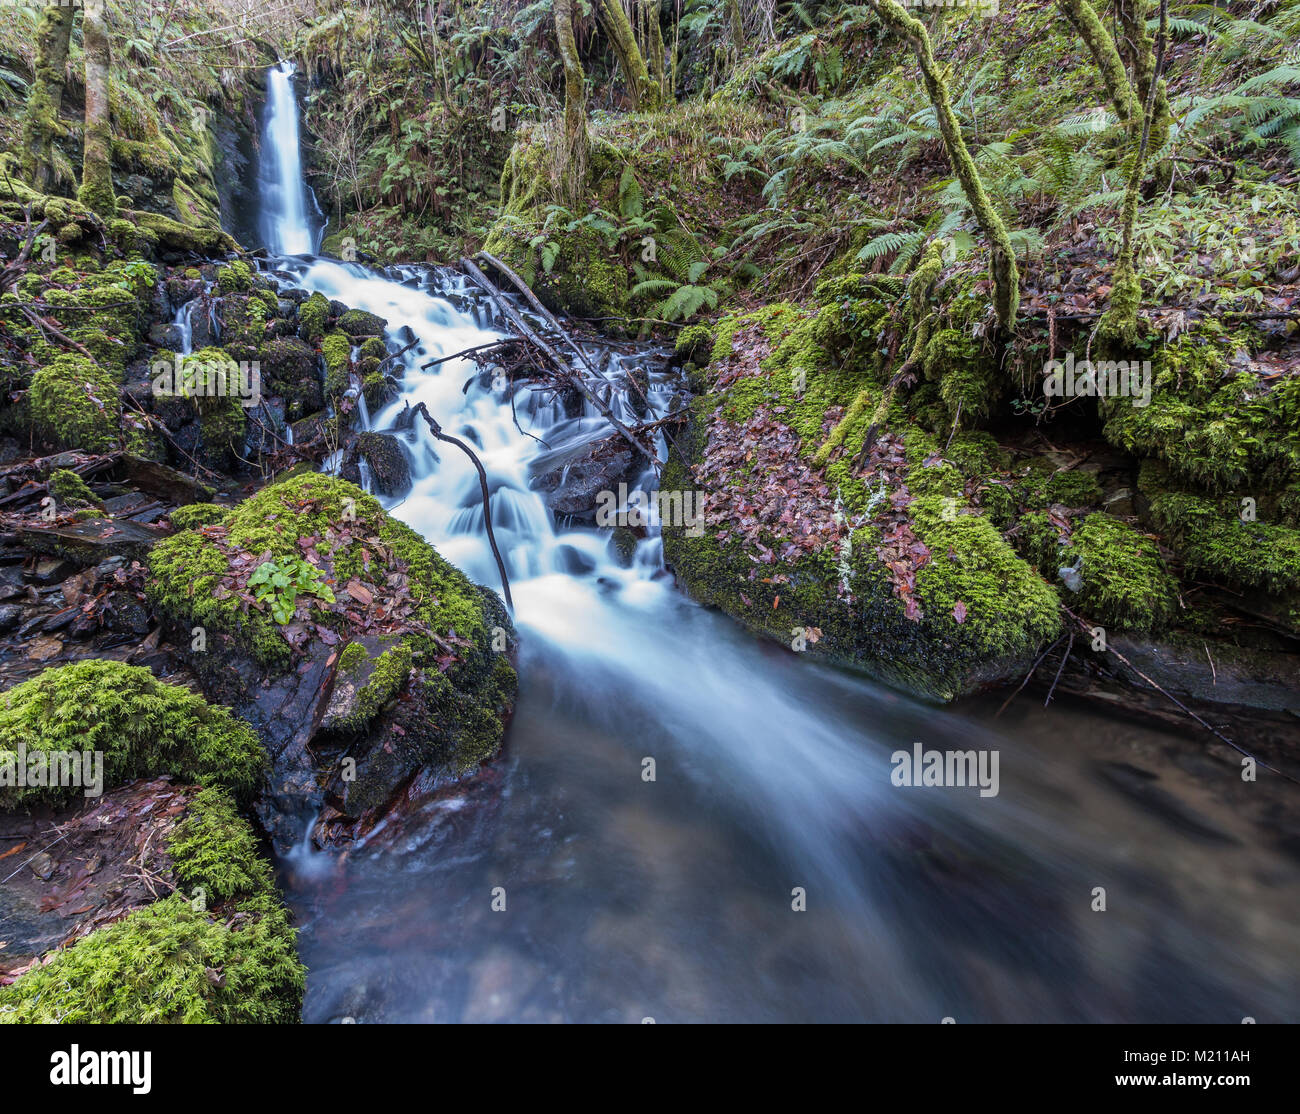 time of waterfalls and rivers full of water in the autumn of a small town in Galicia, Fonsagrada, worth seeing for its beauty and grandeur Stock Photo